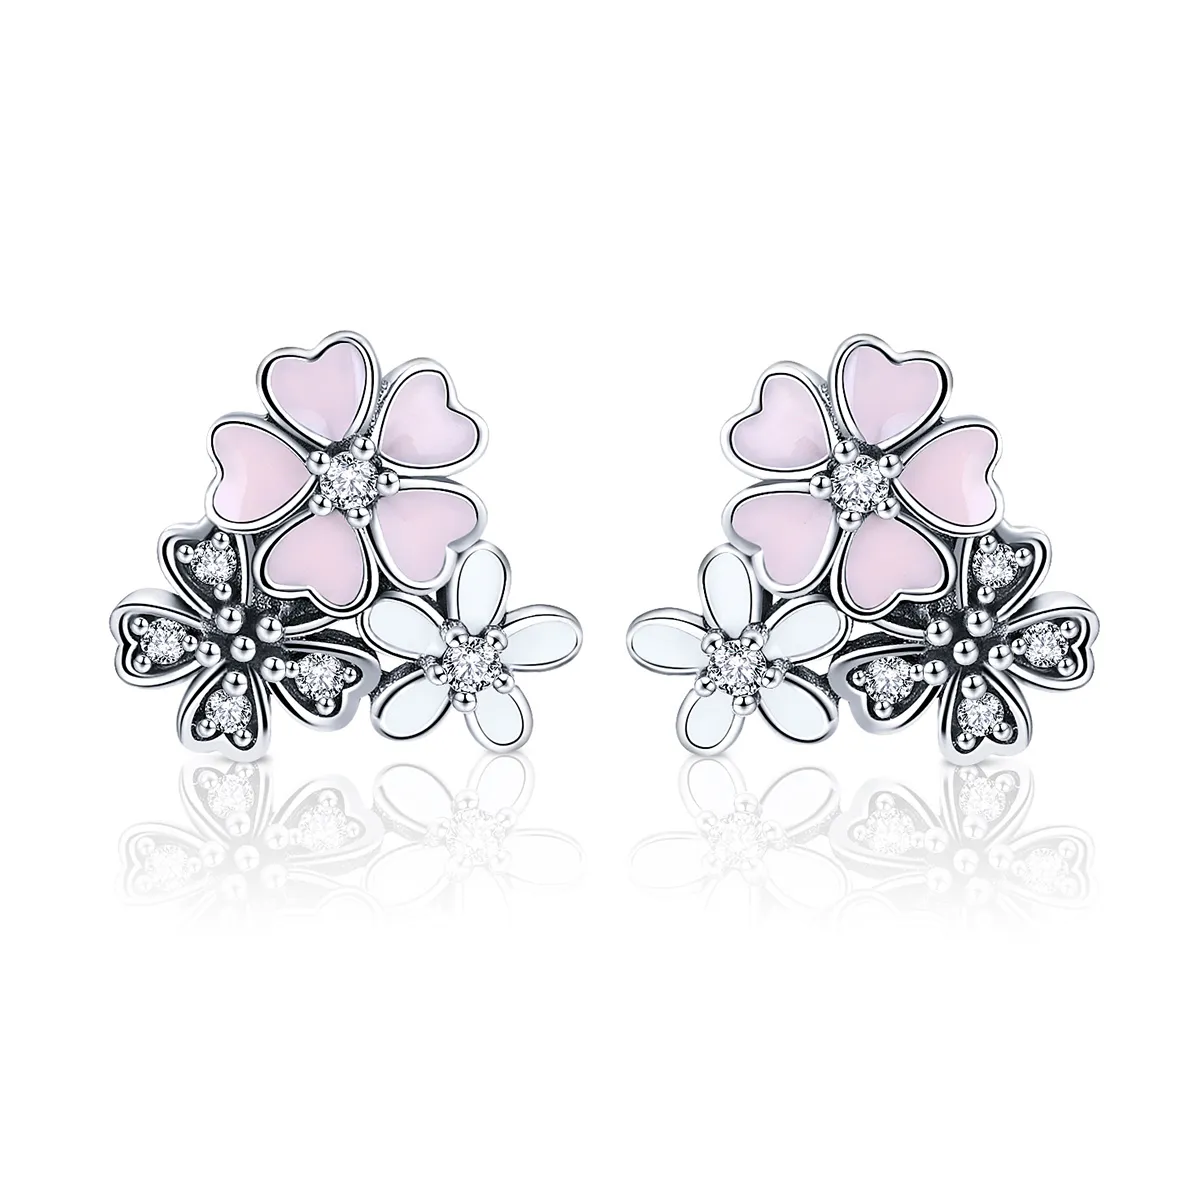 Pandora Style Silver Daisies and Cherry Blossoms Stud Earrings - SCE400